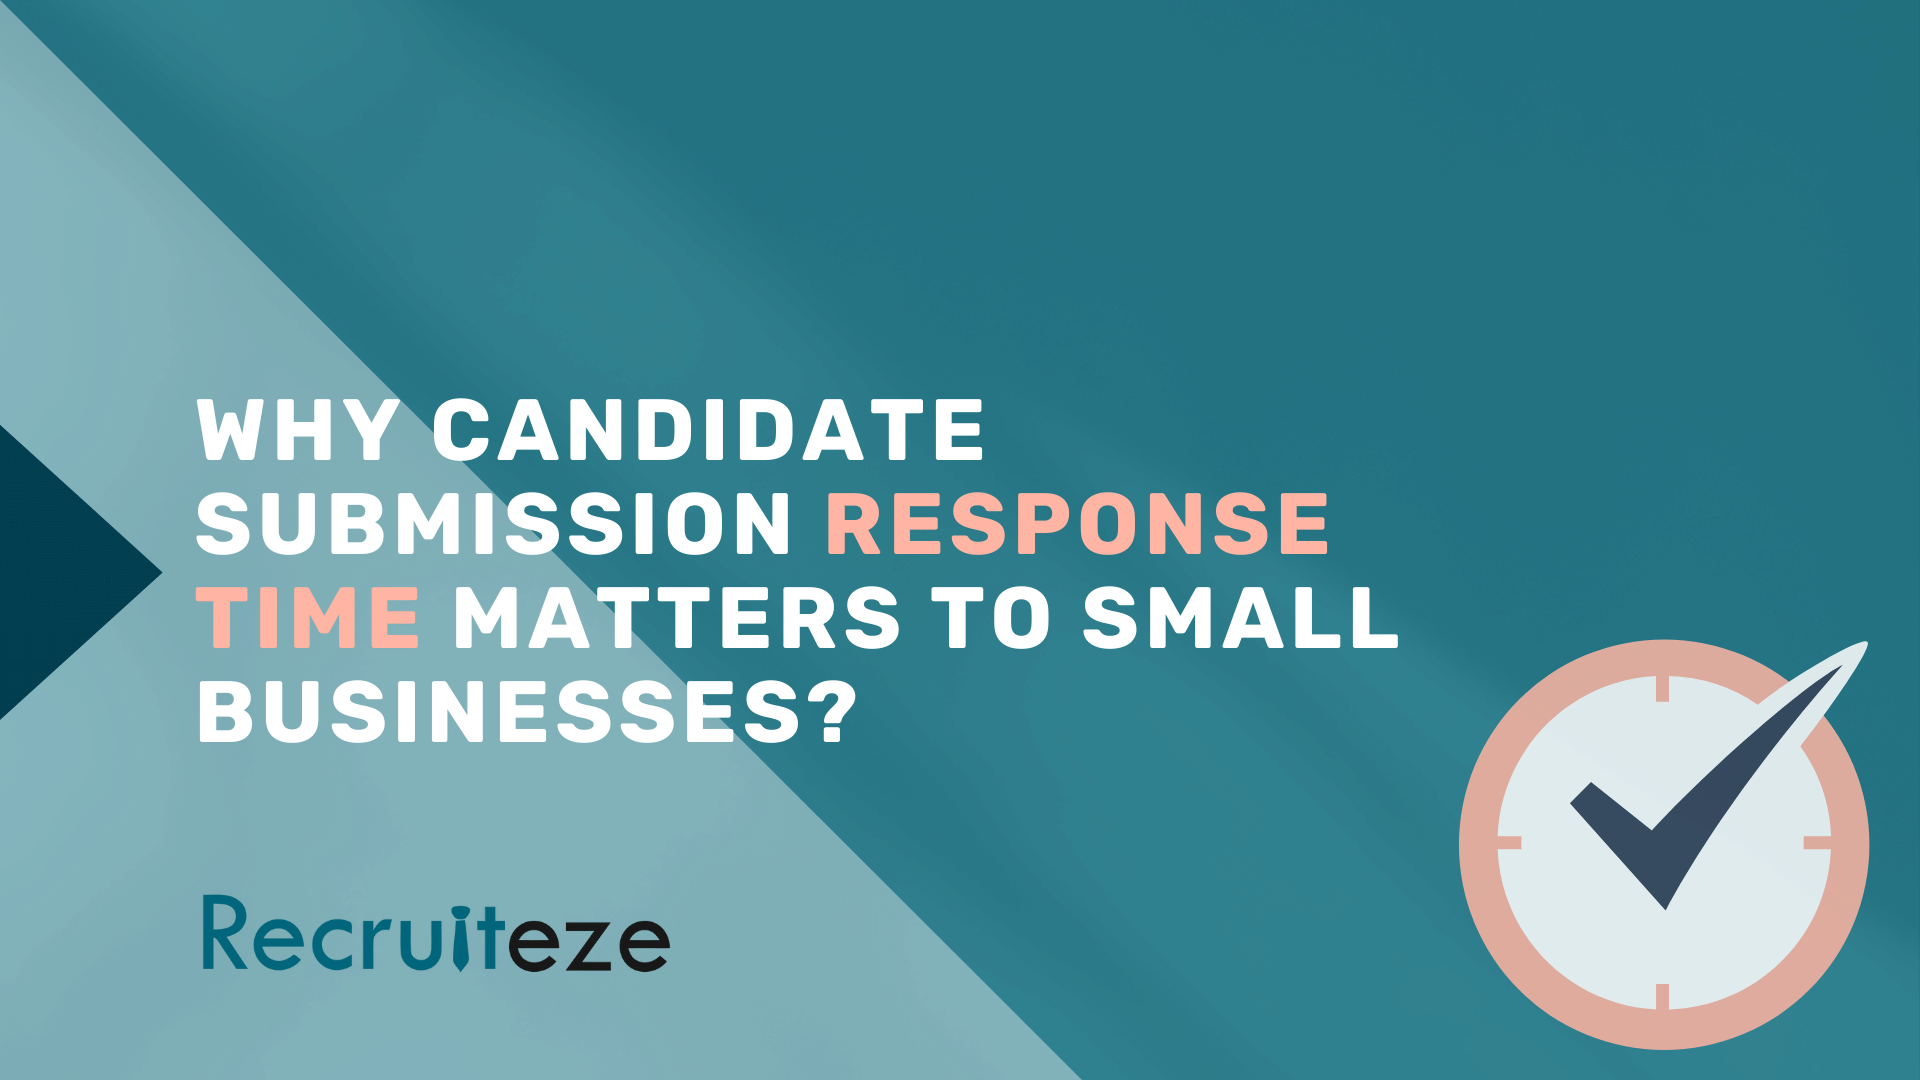 Why Candidate Submission Response Time Matters to Small Businesses